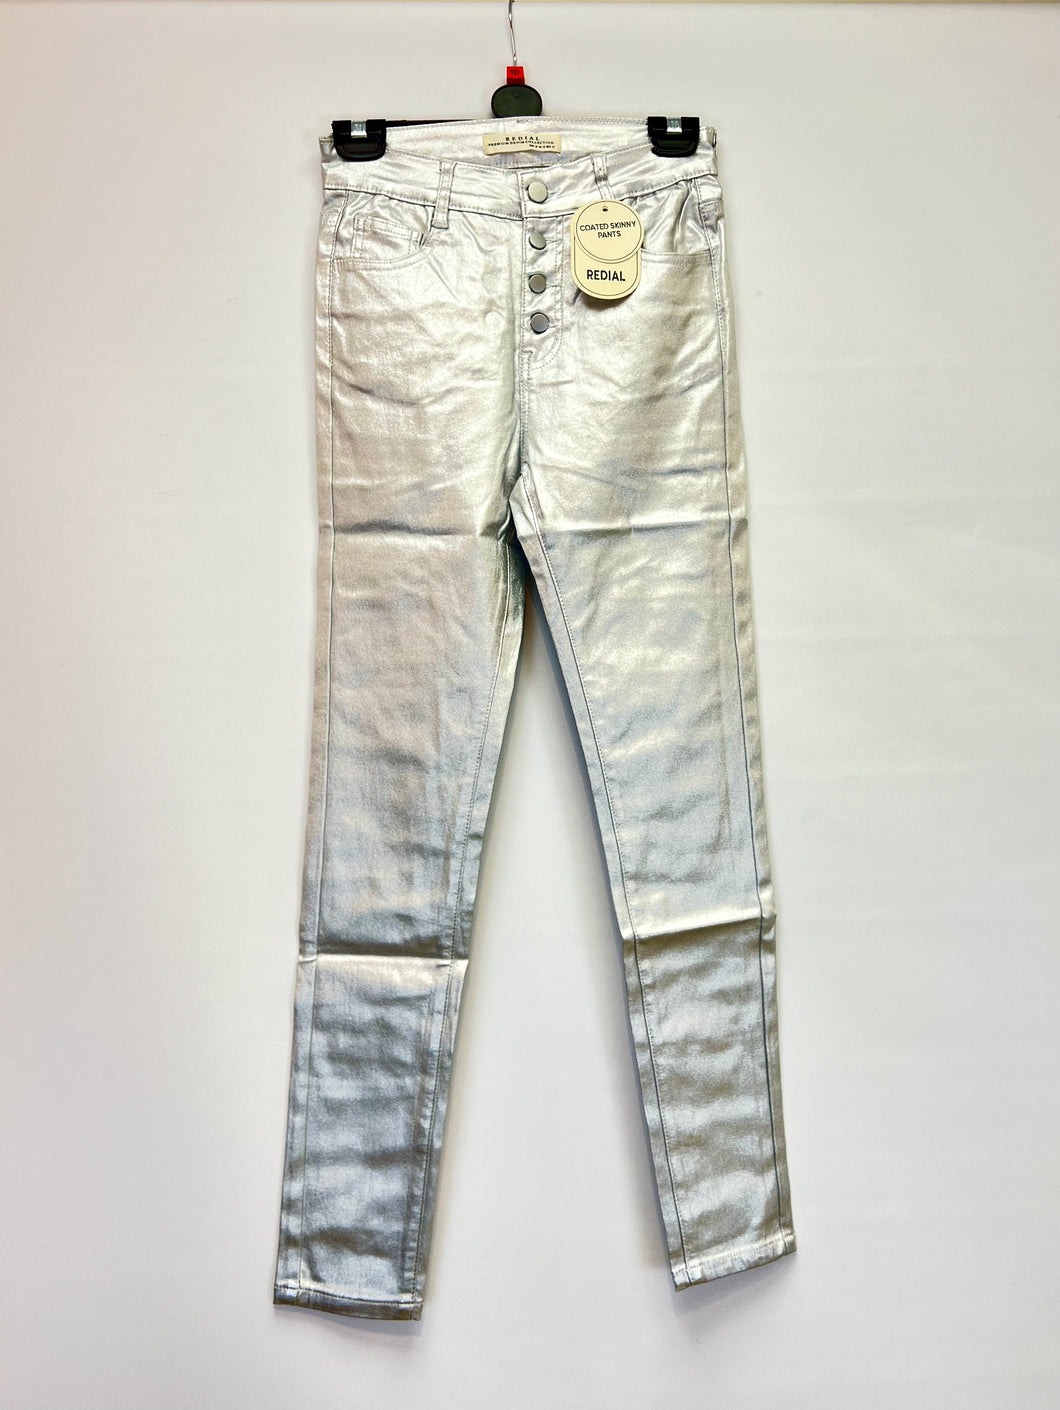 Redial silver coated jeans